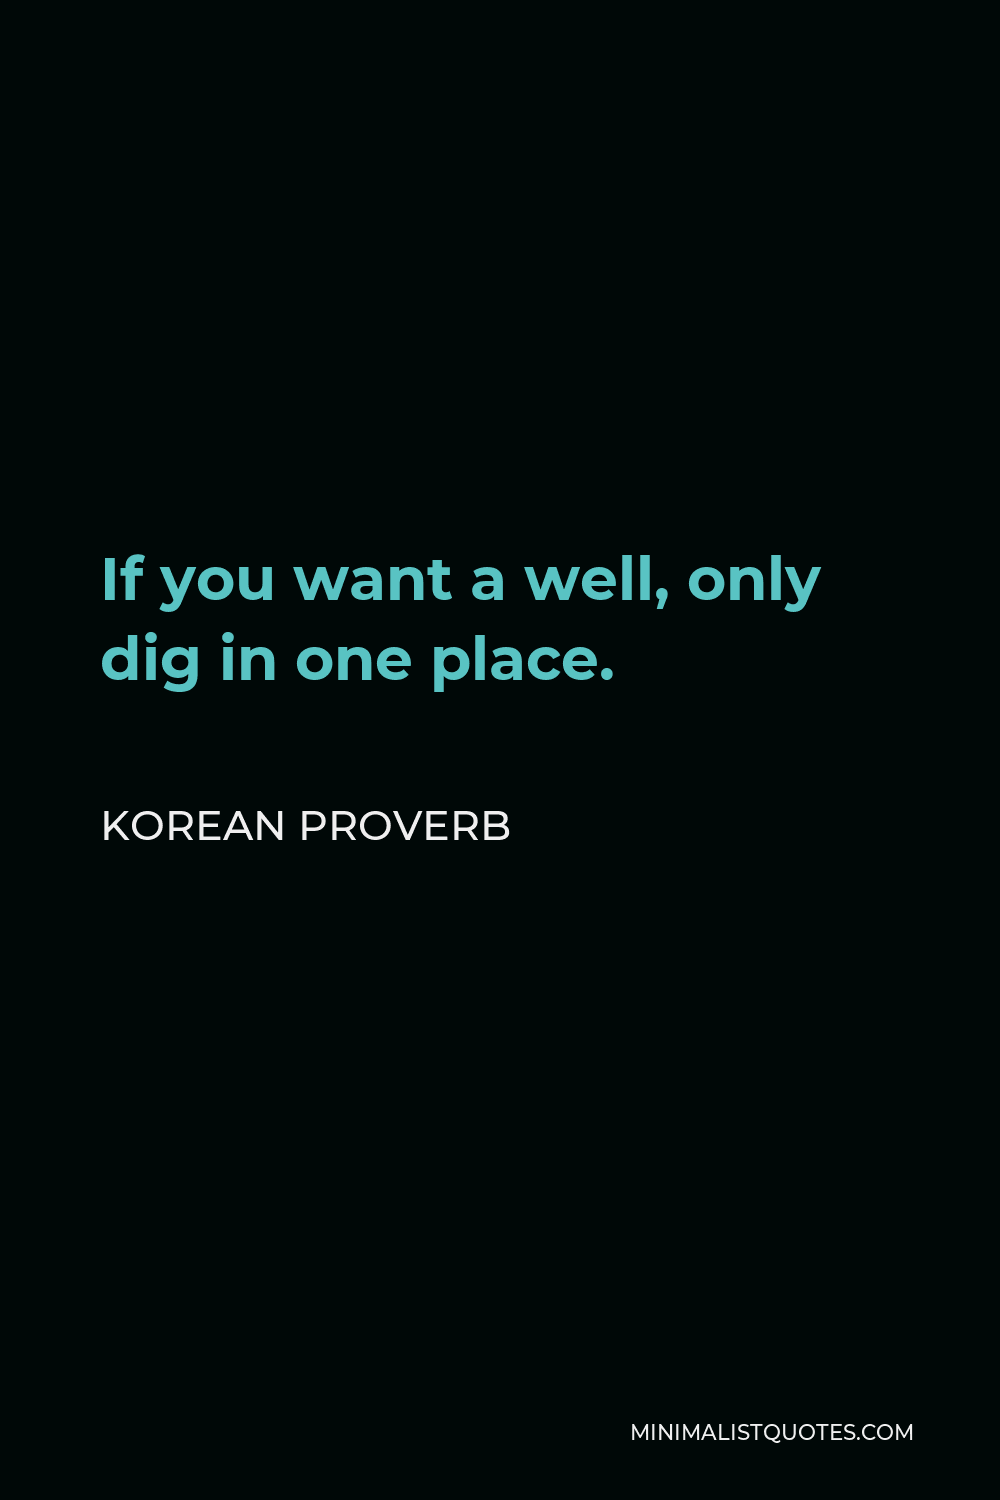 Korean Proverb Quote - If you want a well, only dig in one place.